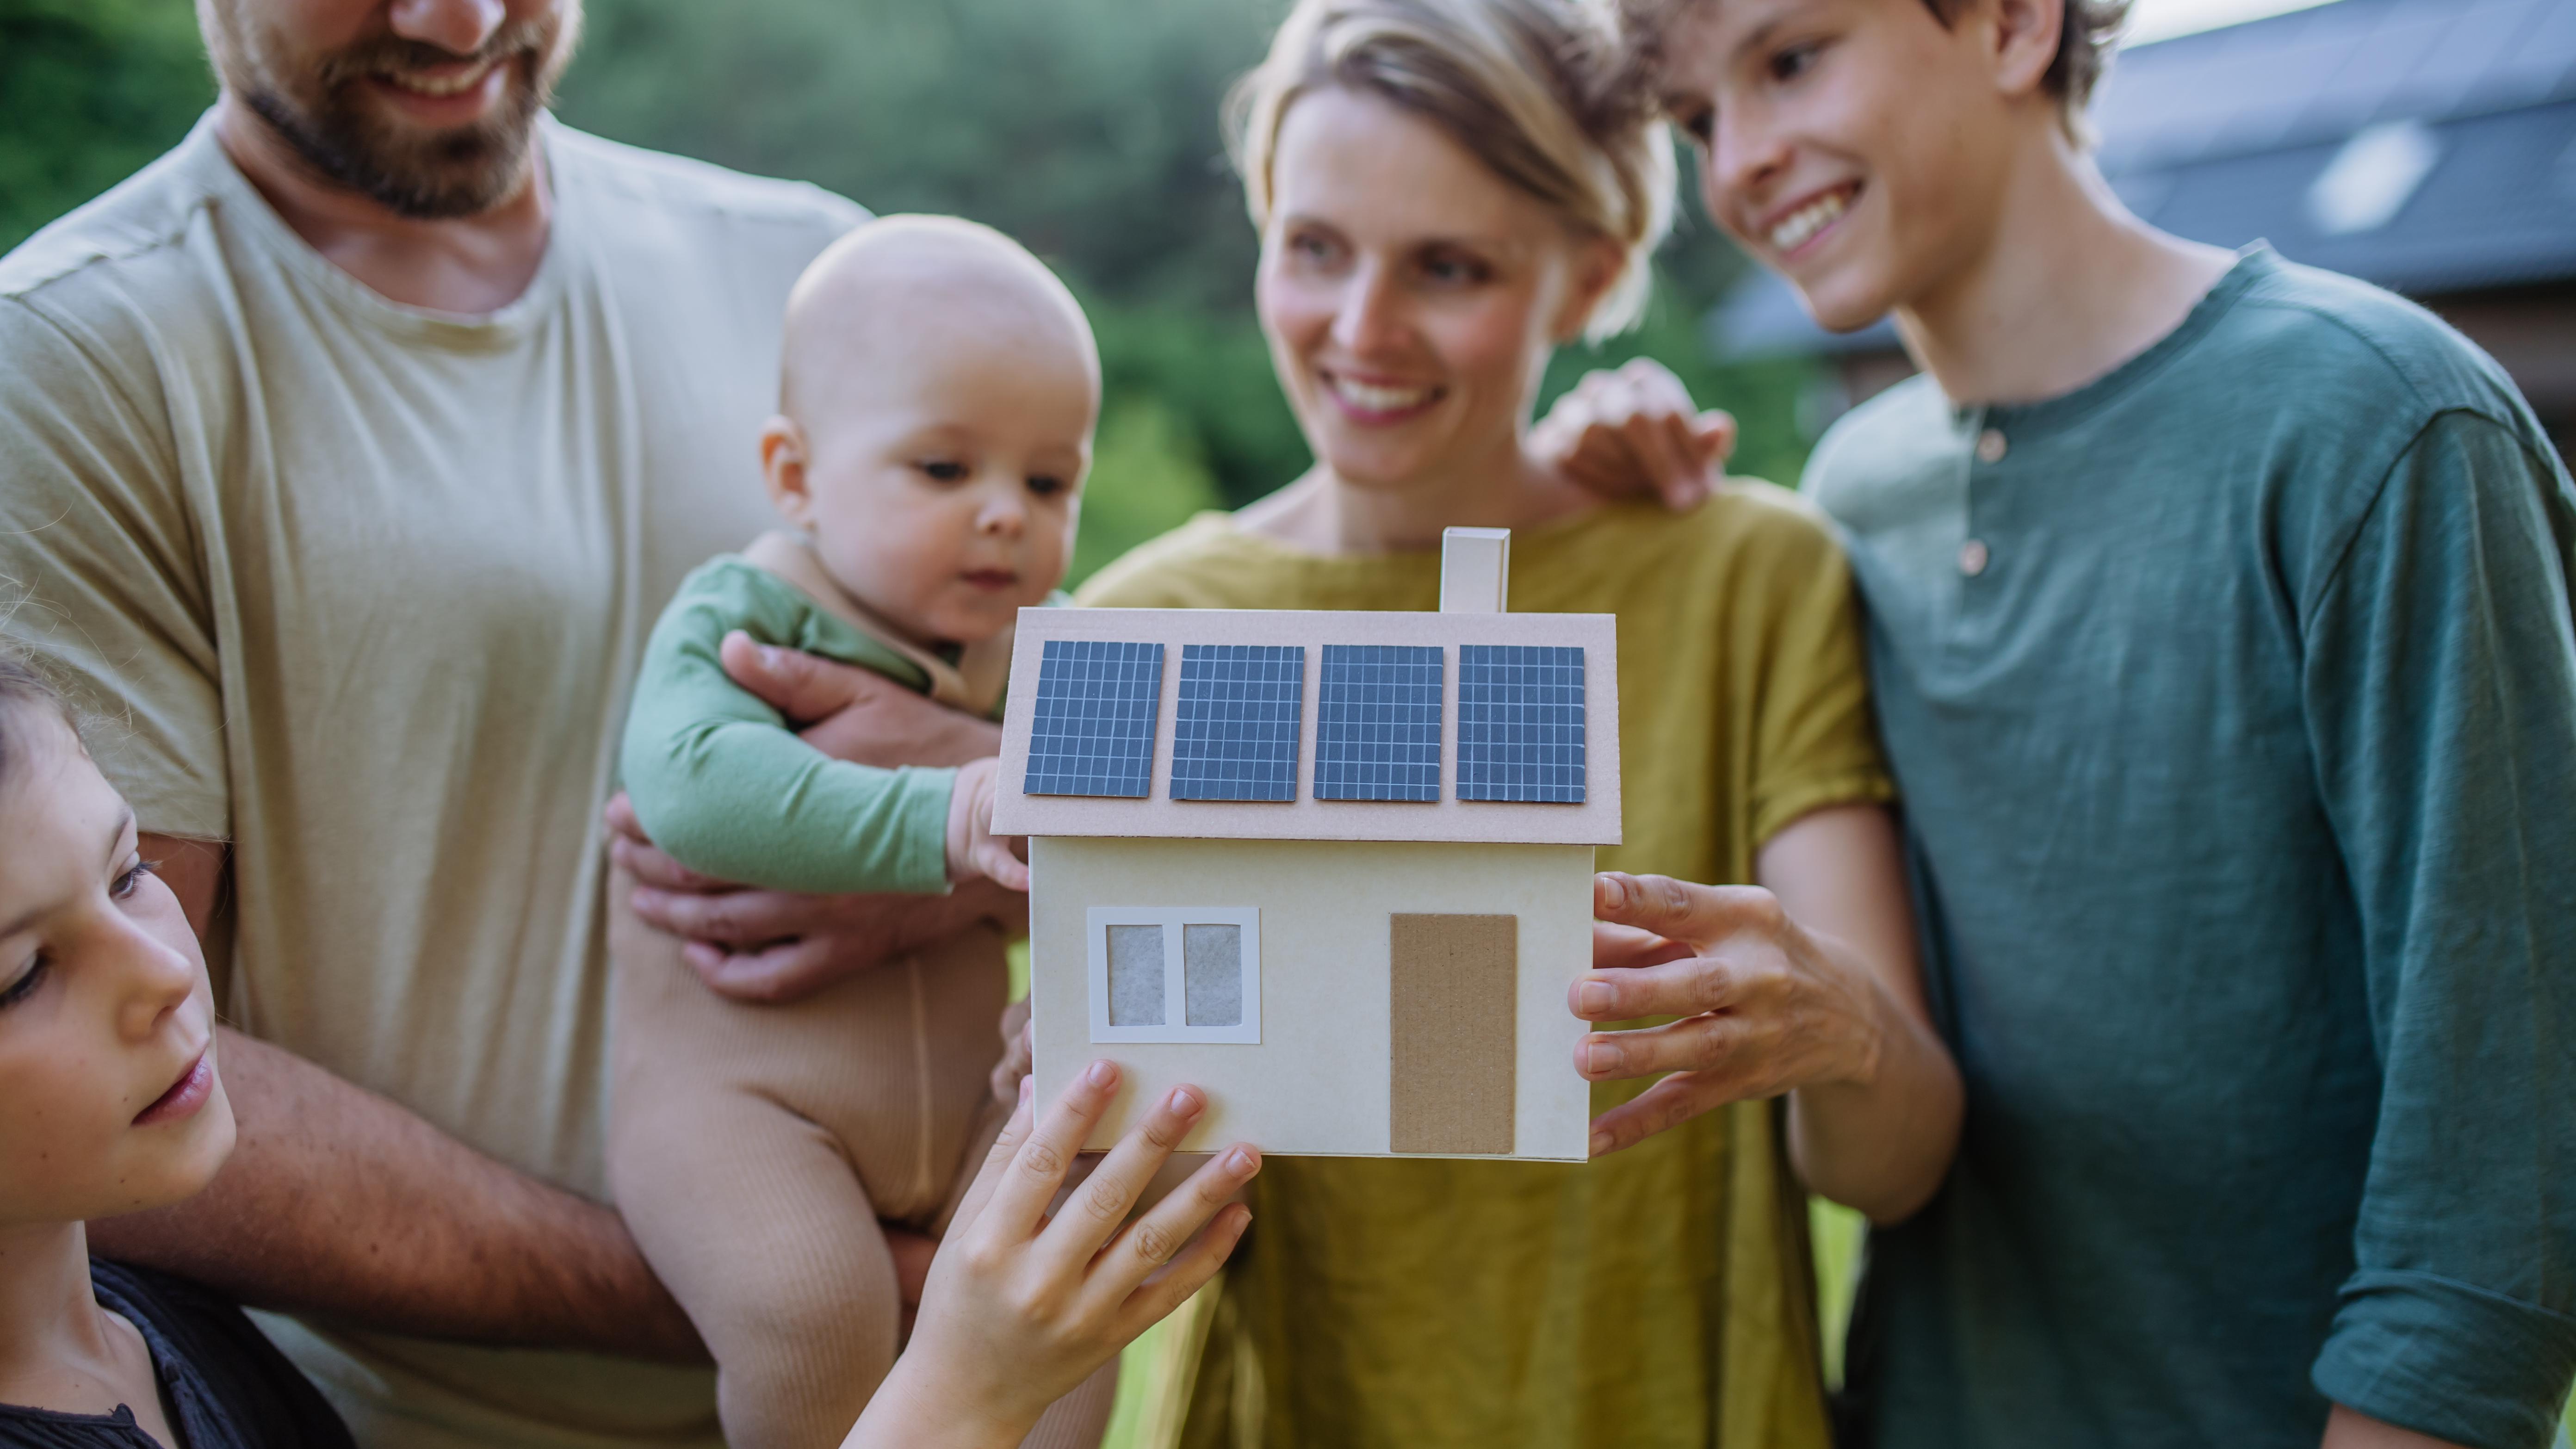 Happy family with three children holding model of house ith solar photovoltaics. Alternative energy, saving resources and sustainable lifestyle concept.